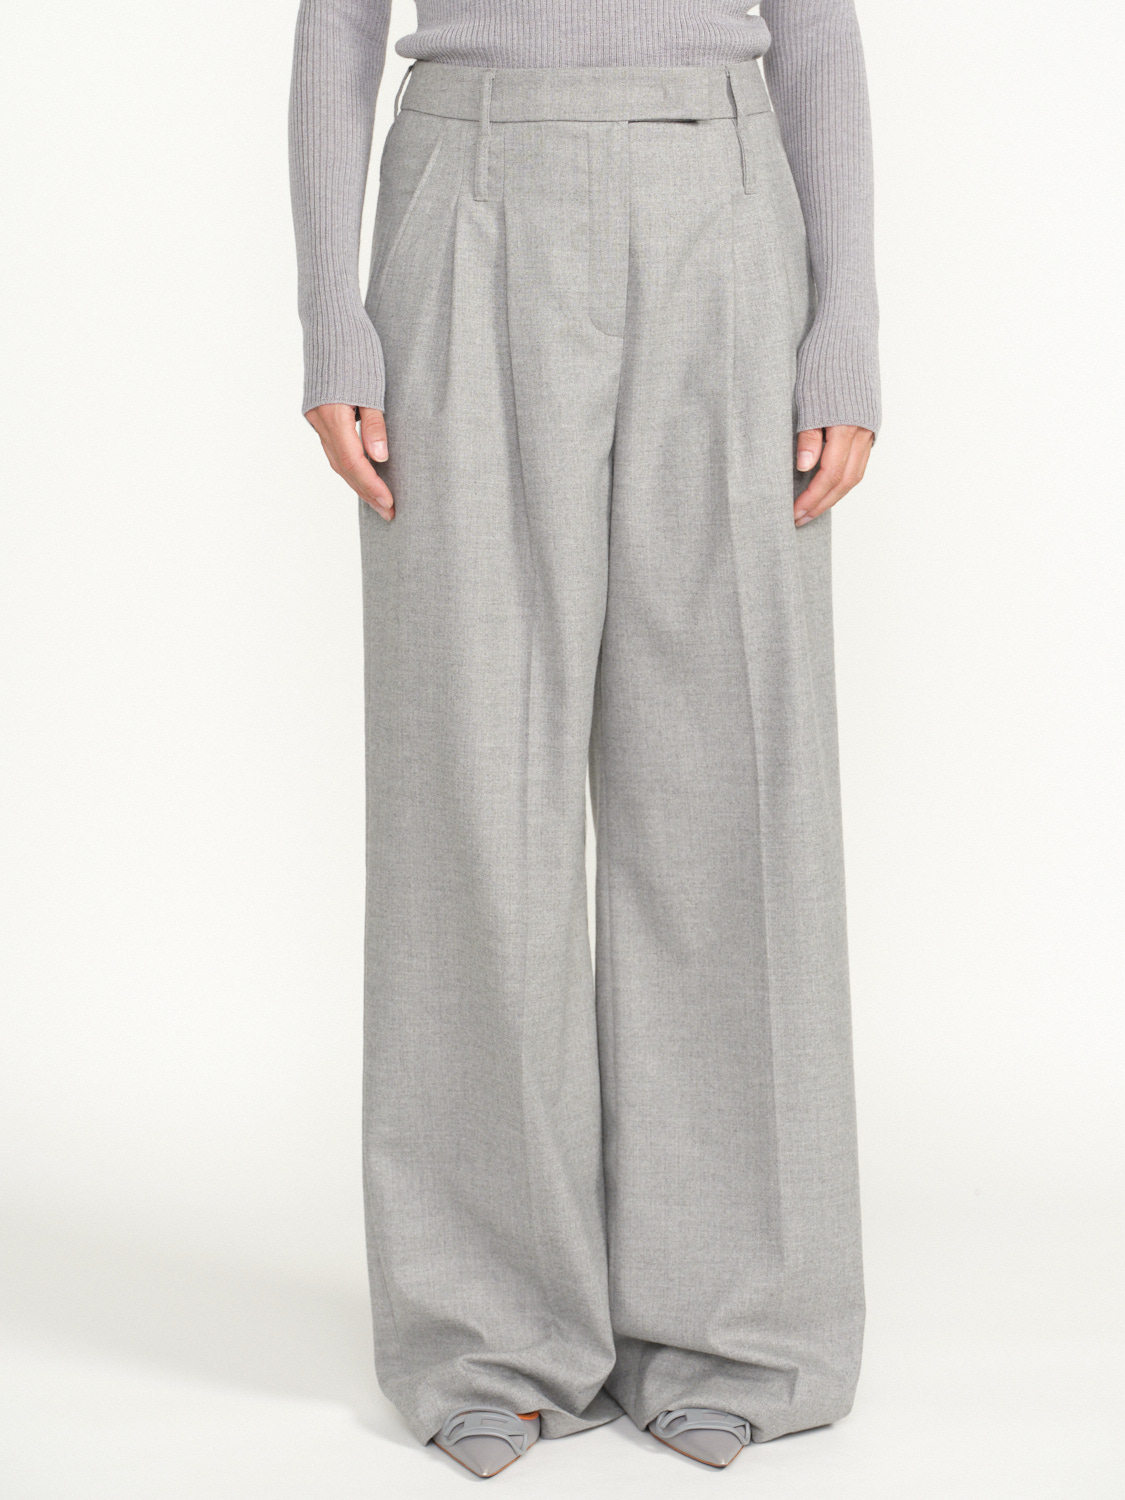 Seductive Giselle - pleated wool trousers grey 34